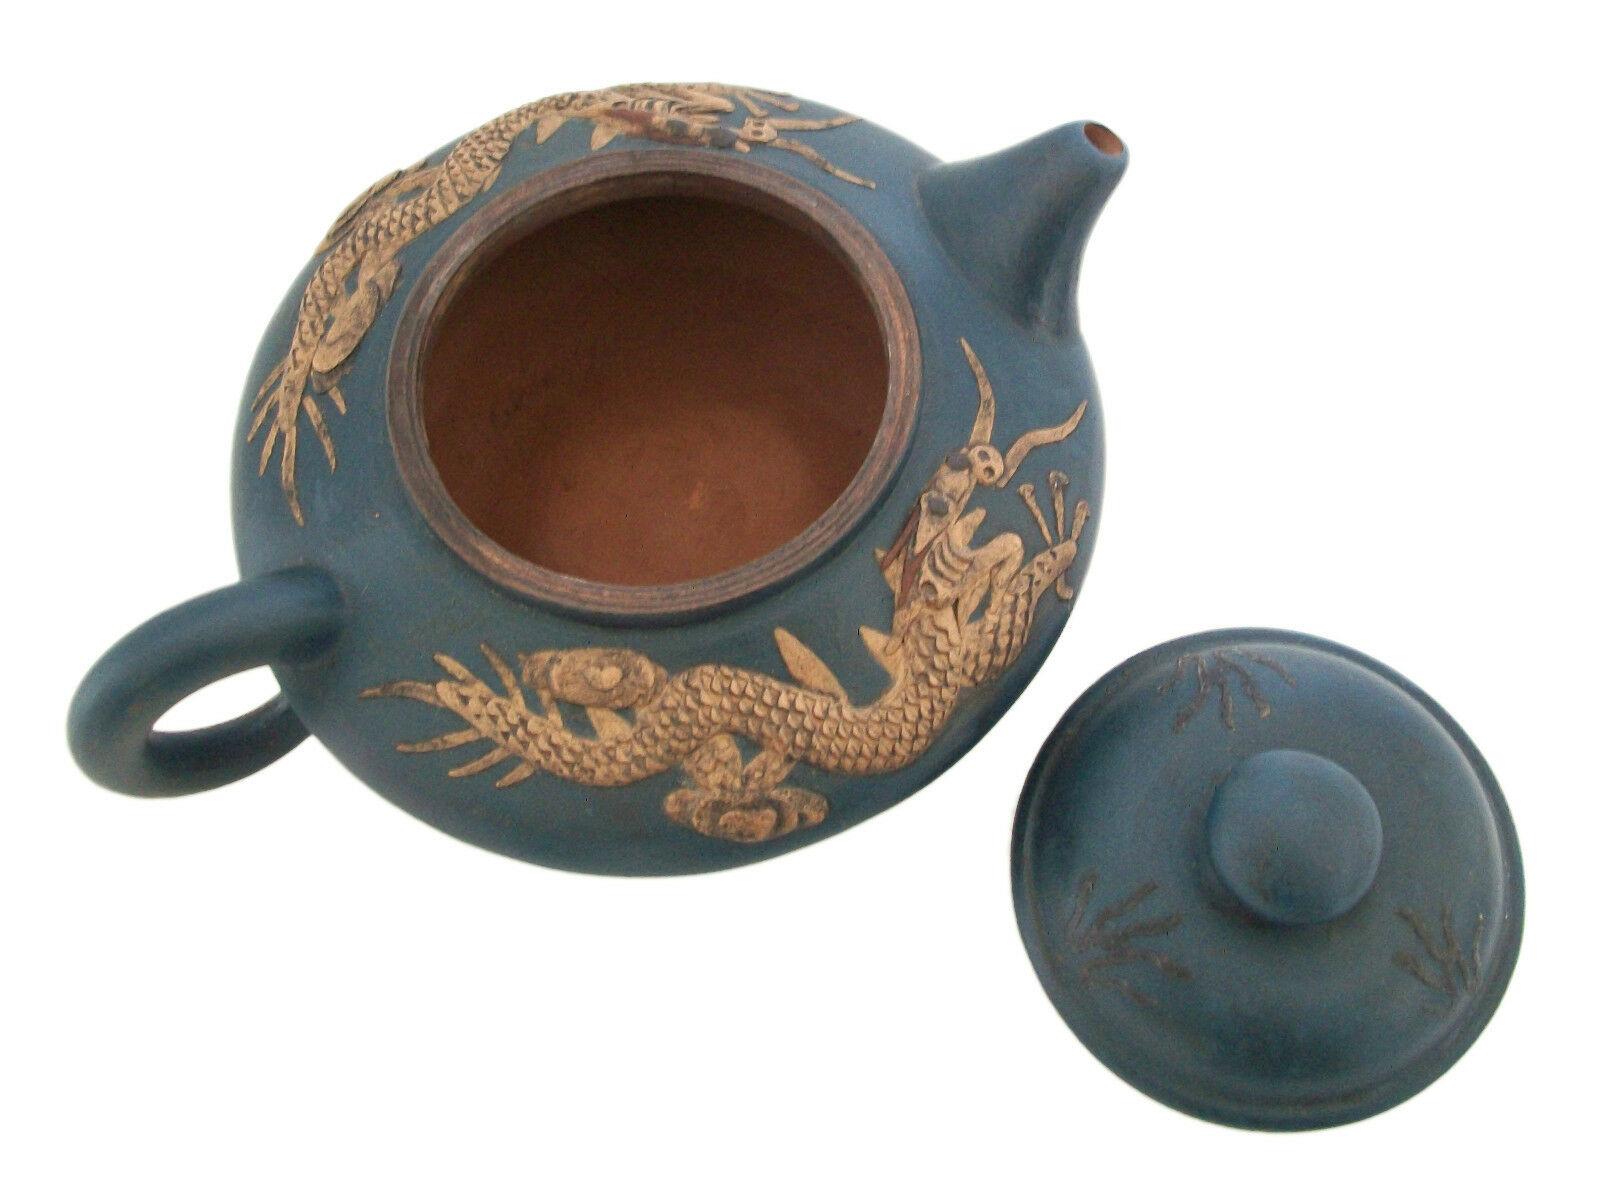 Vintage Yixing Zisha Teapot - Fine Carving/Glaze, Signed, China, 20th Century In Good Condition For Sale In Chatham, ON